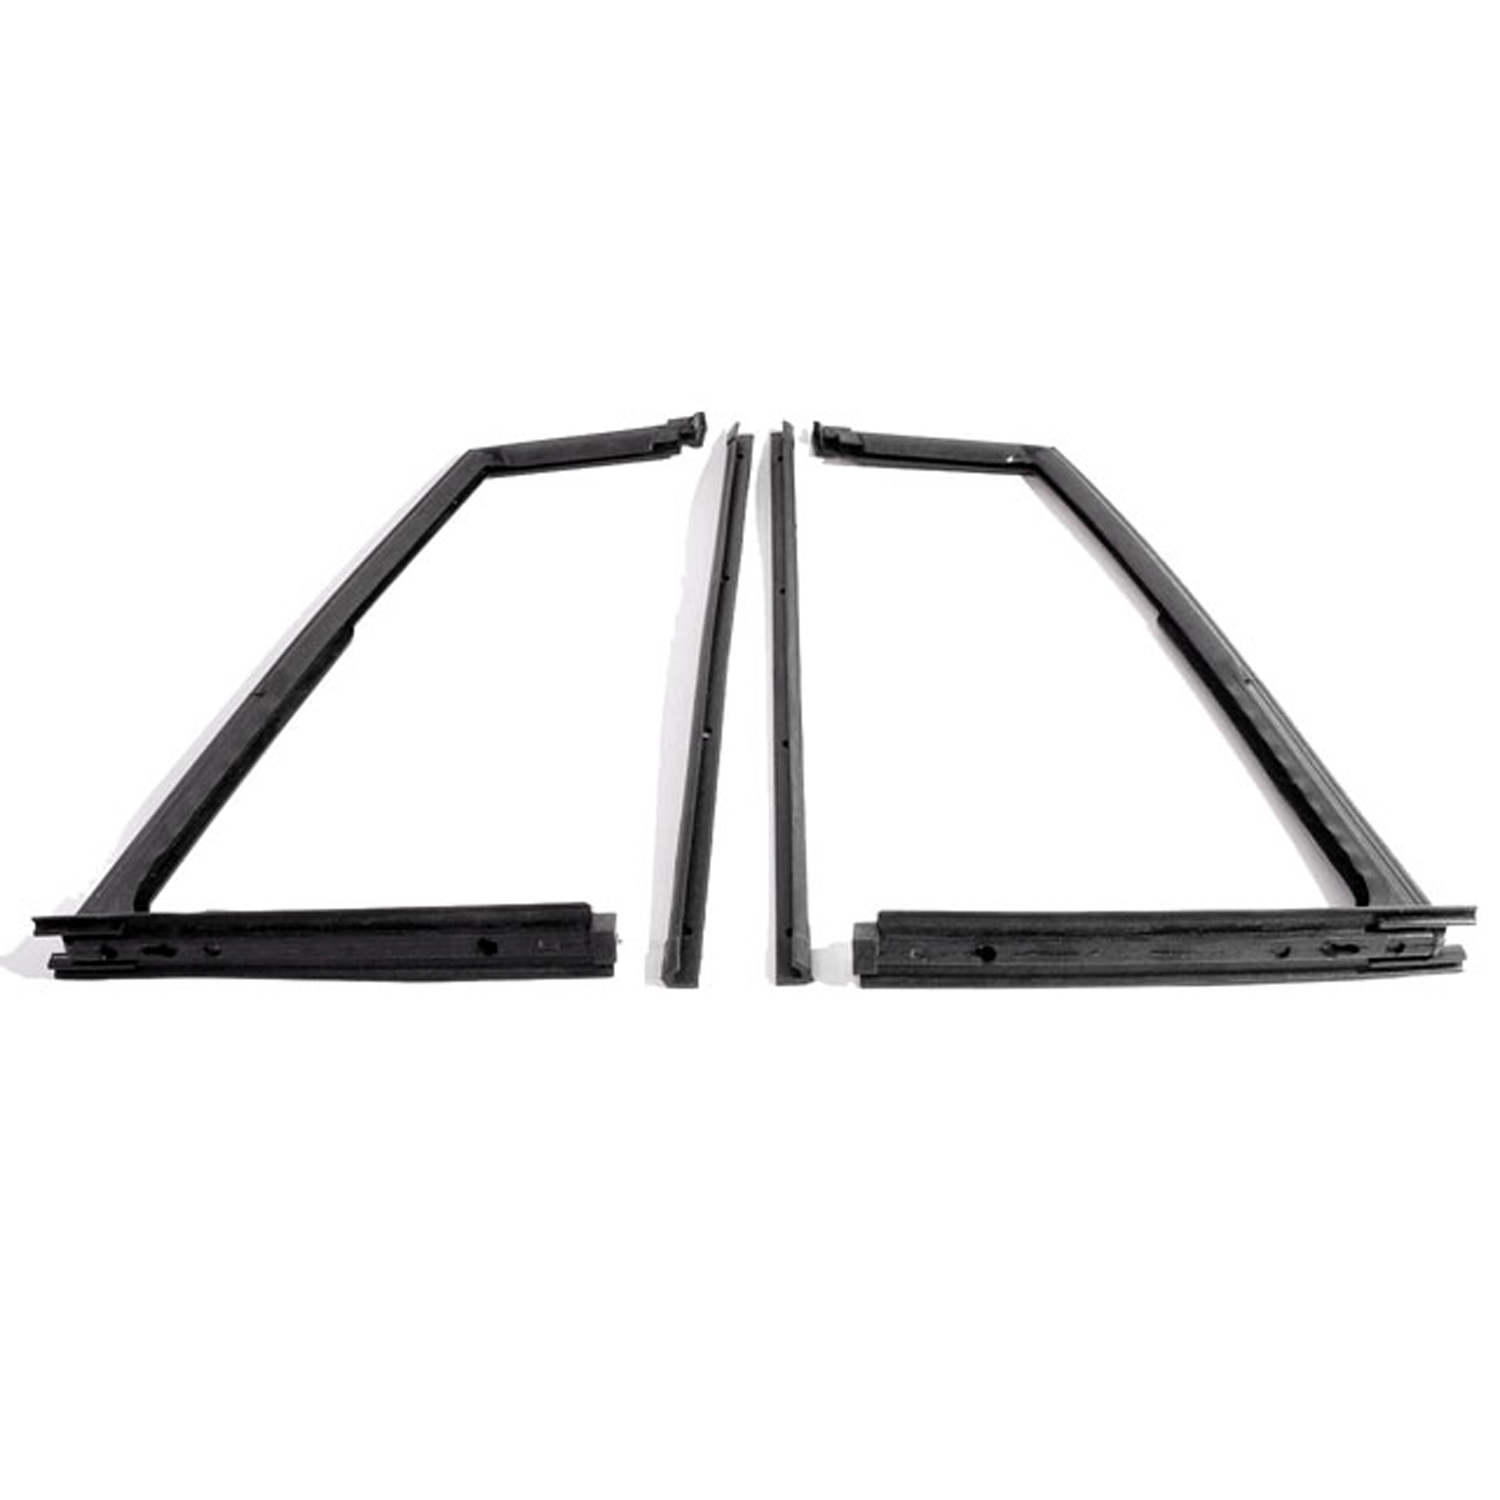 1971 Jeep Jeepster Vent Window Seals.  Pair-WR 9700